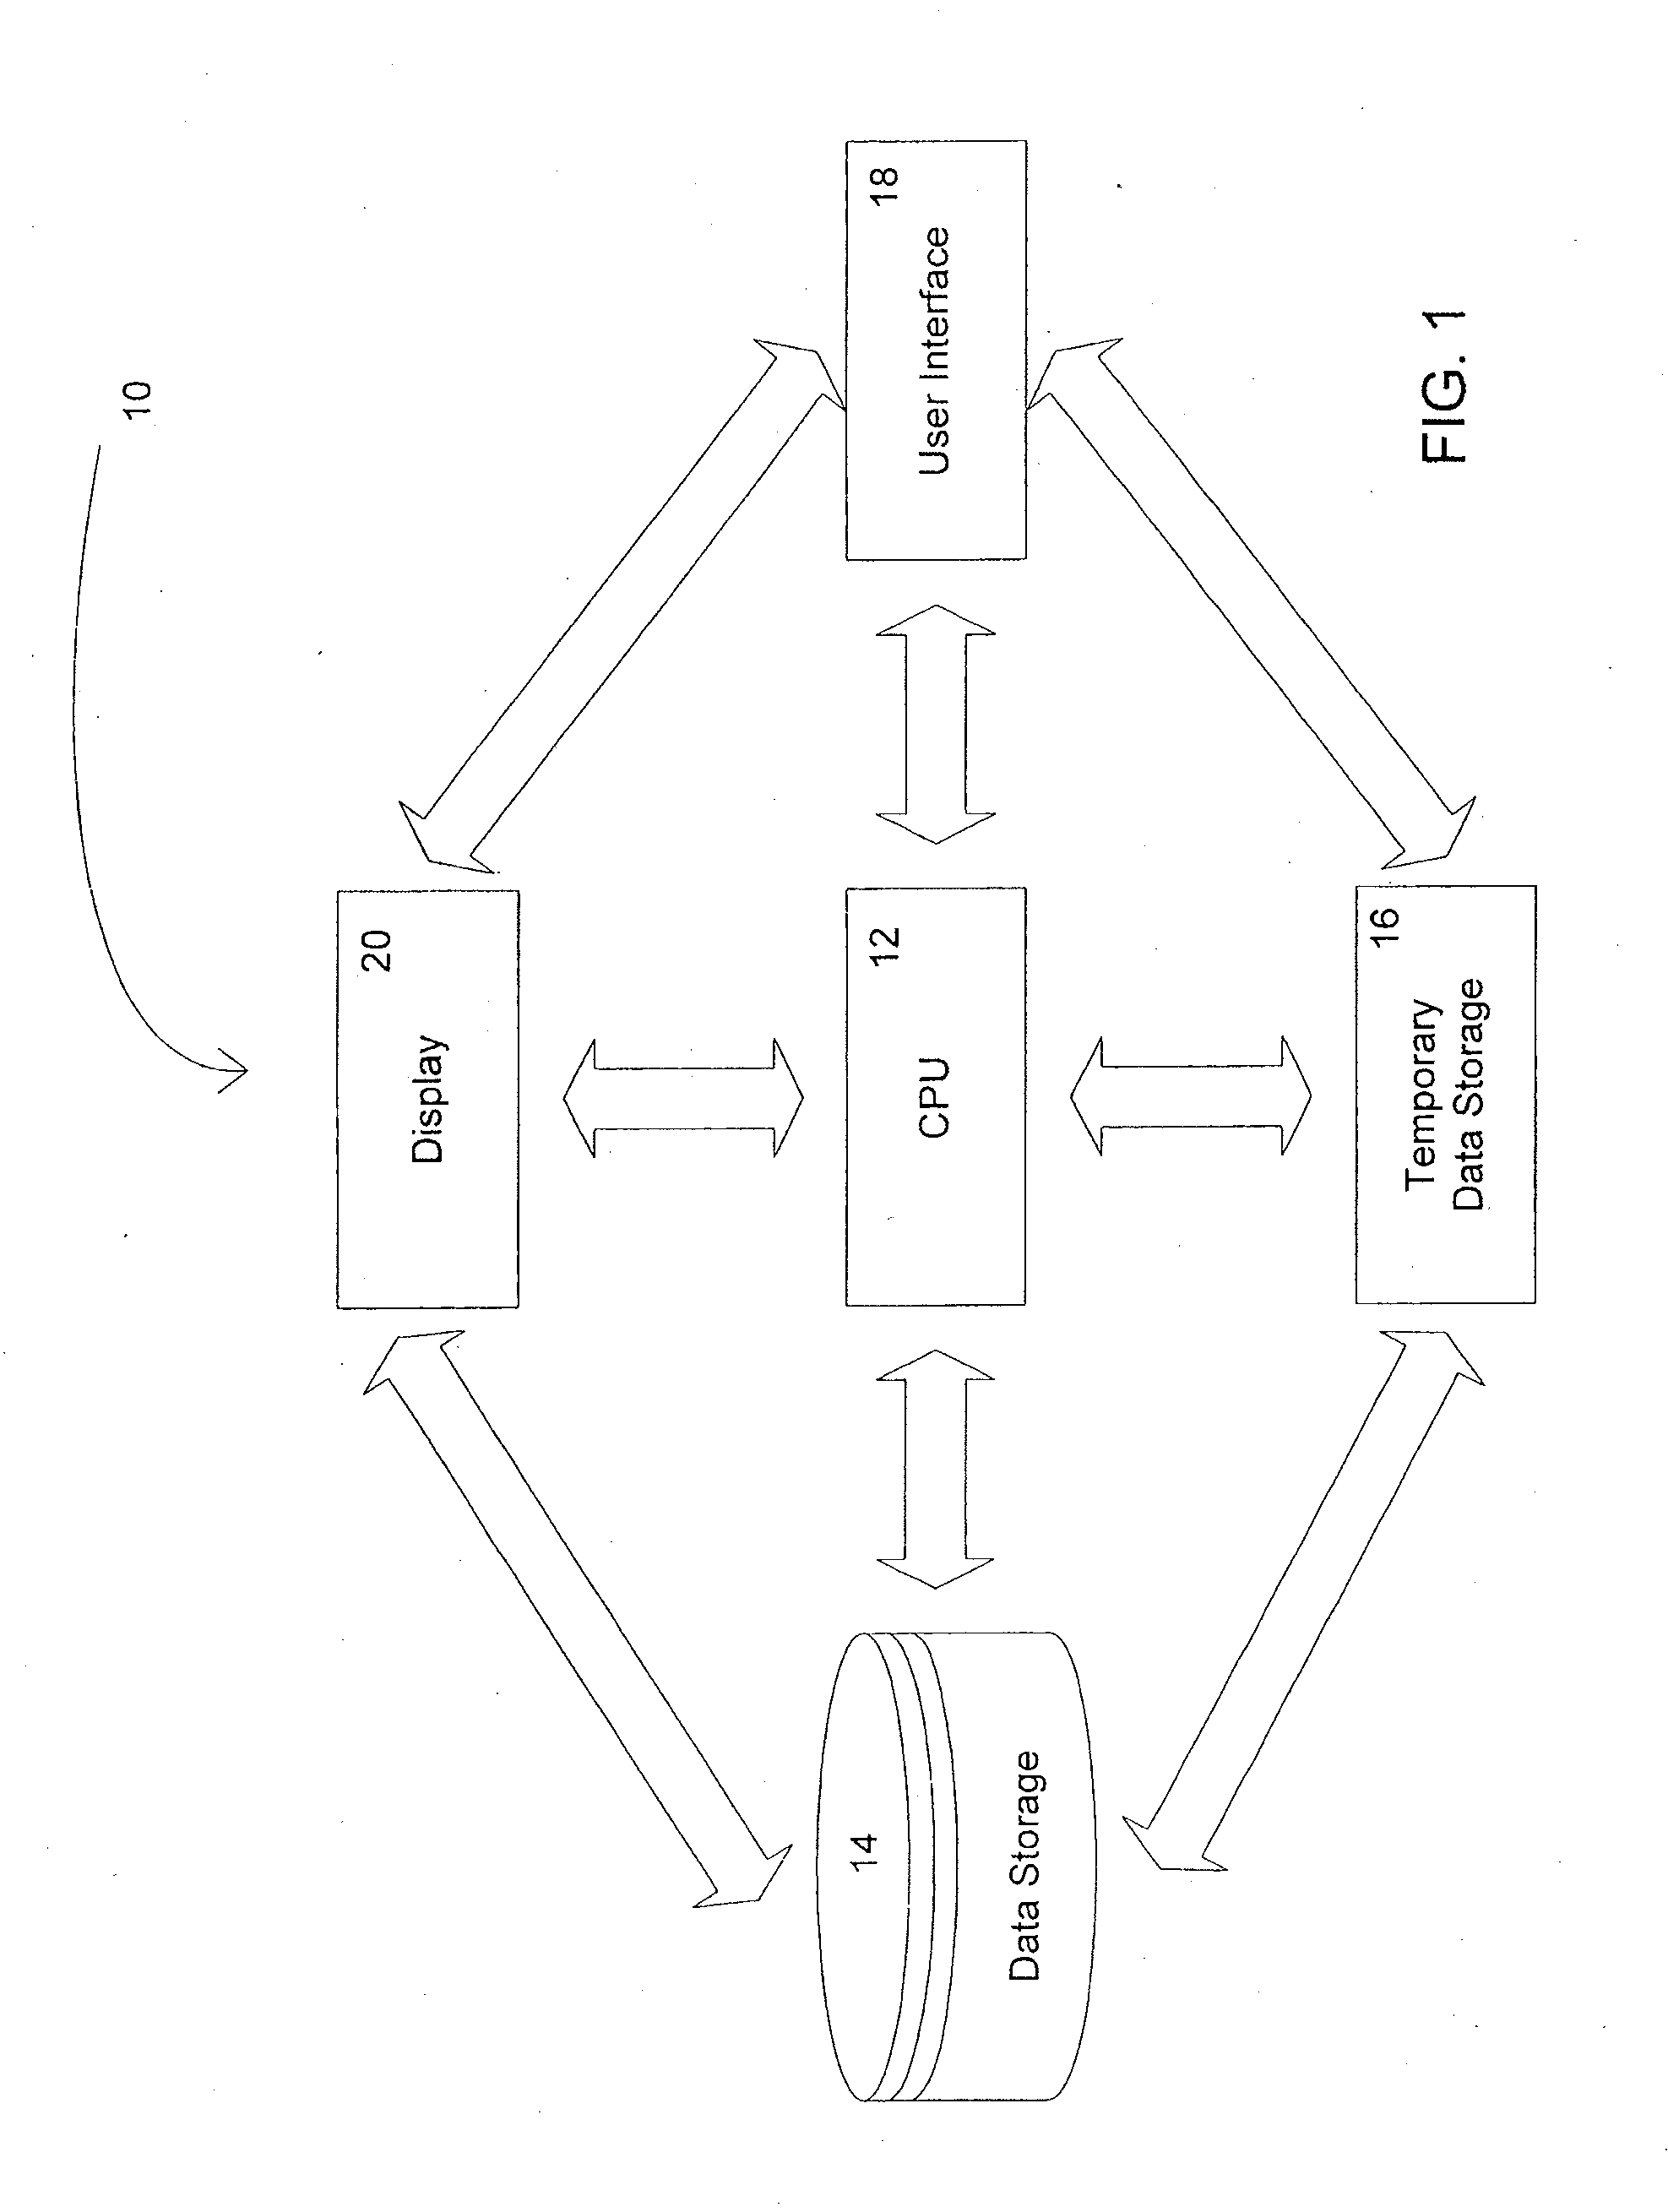 System and method of drug disease matching